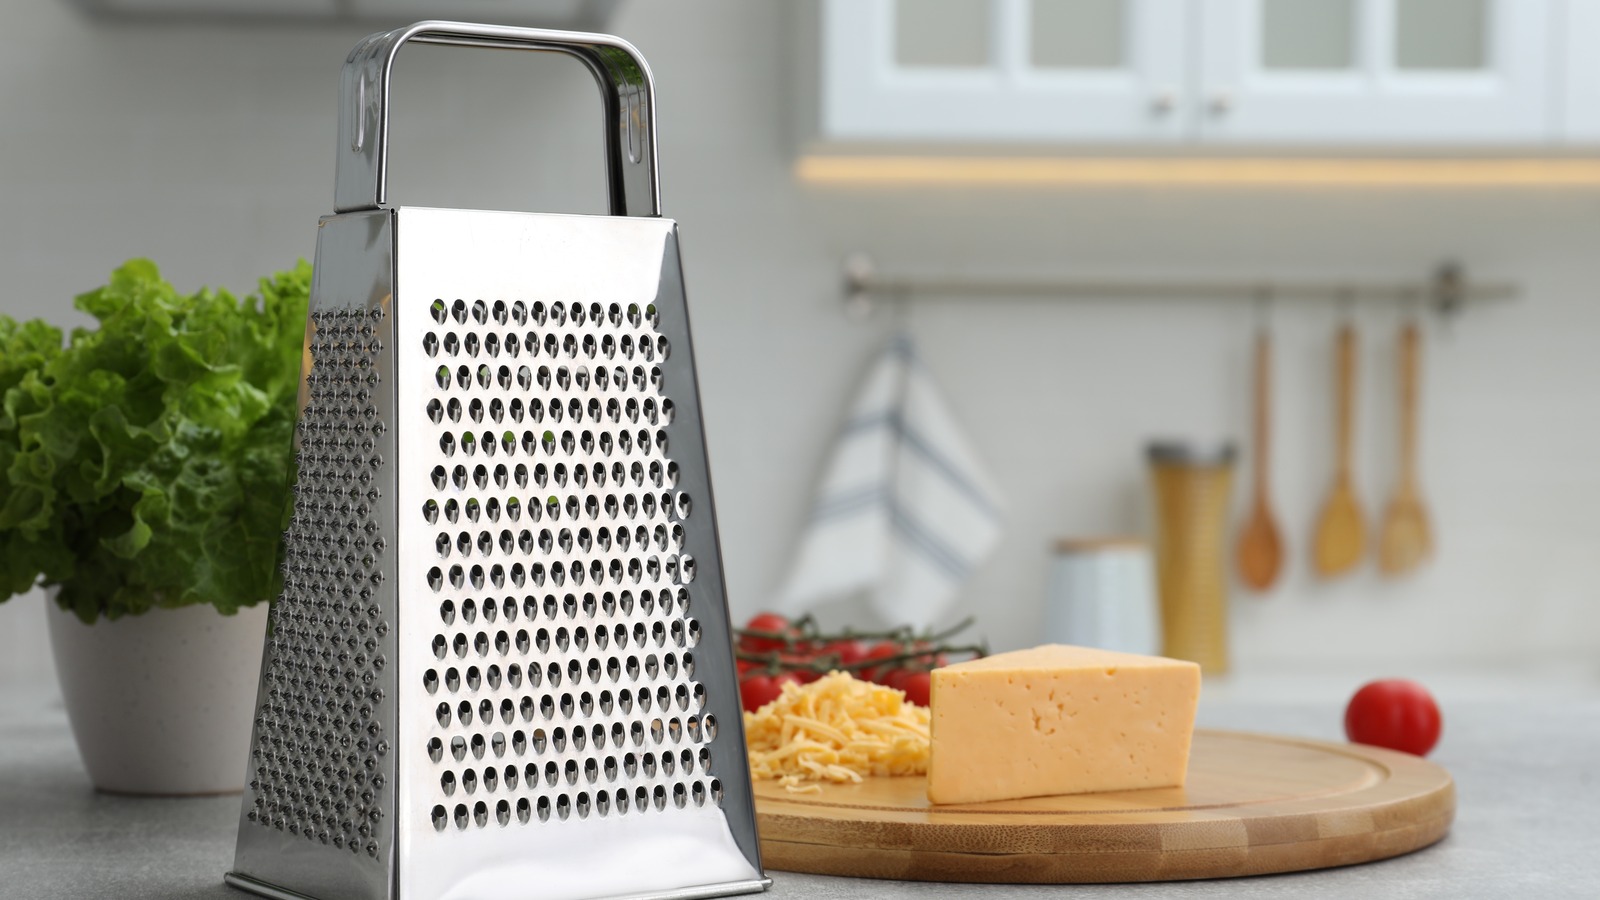 https://www.mashed.com/img/gallery/the-one-mistake-that-will-ruin-your-cheese-grater/l-intro-1654023209.jpg